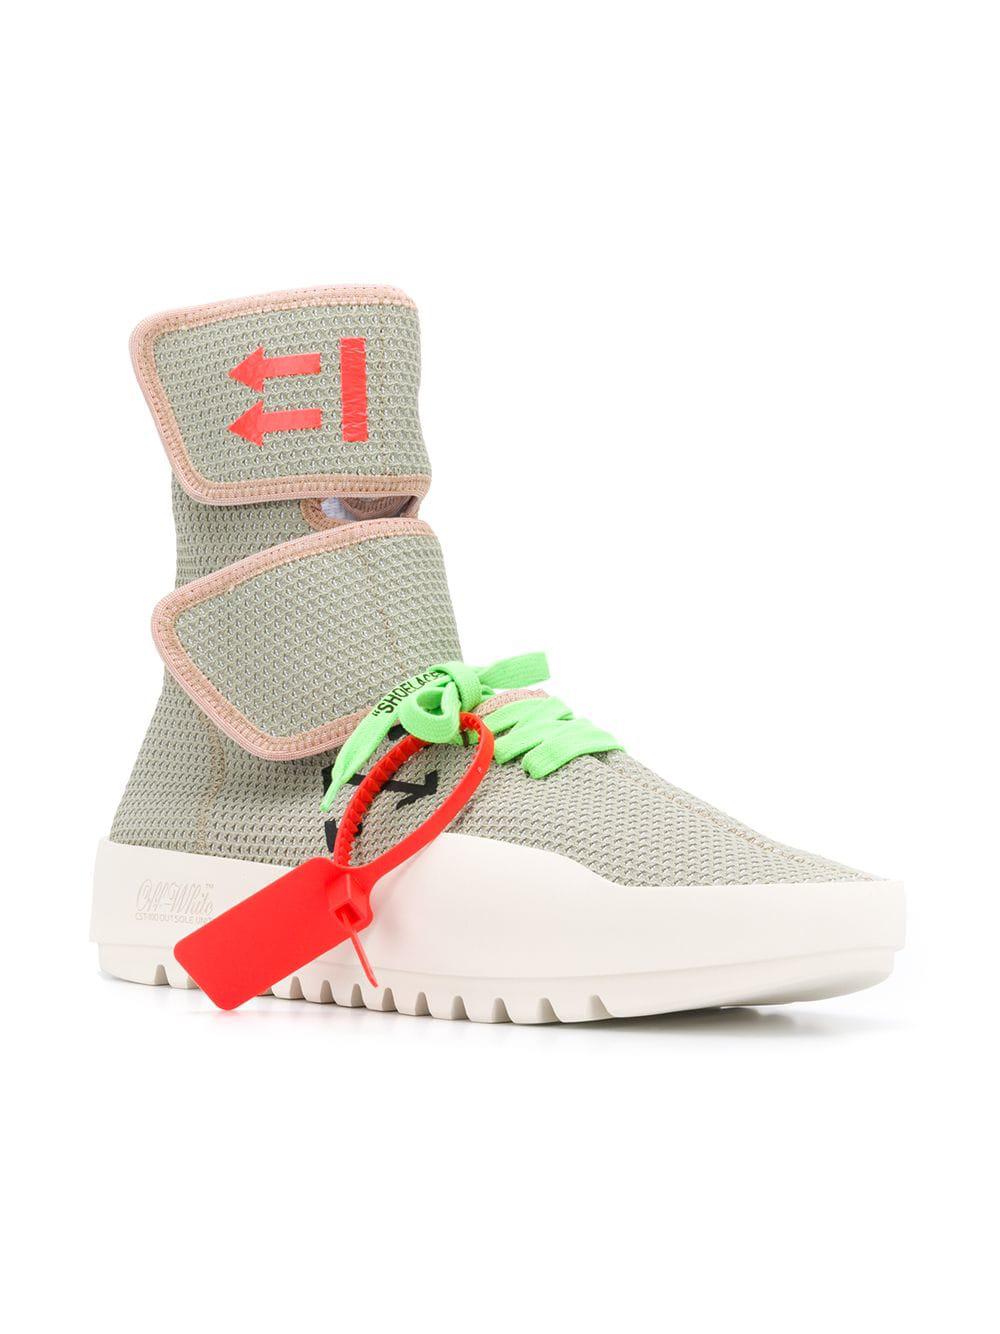 Off-White c/o Virgil Abloh Cst-001 Moto Wrap Sneakers in Gray Green (Green)  for Men - Lyst